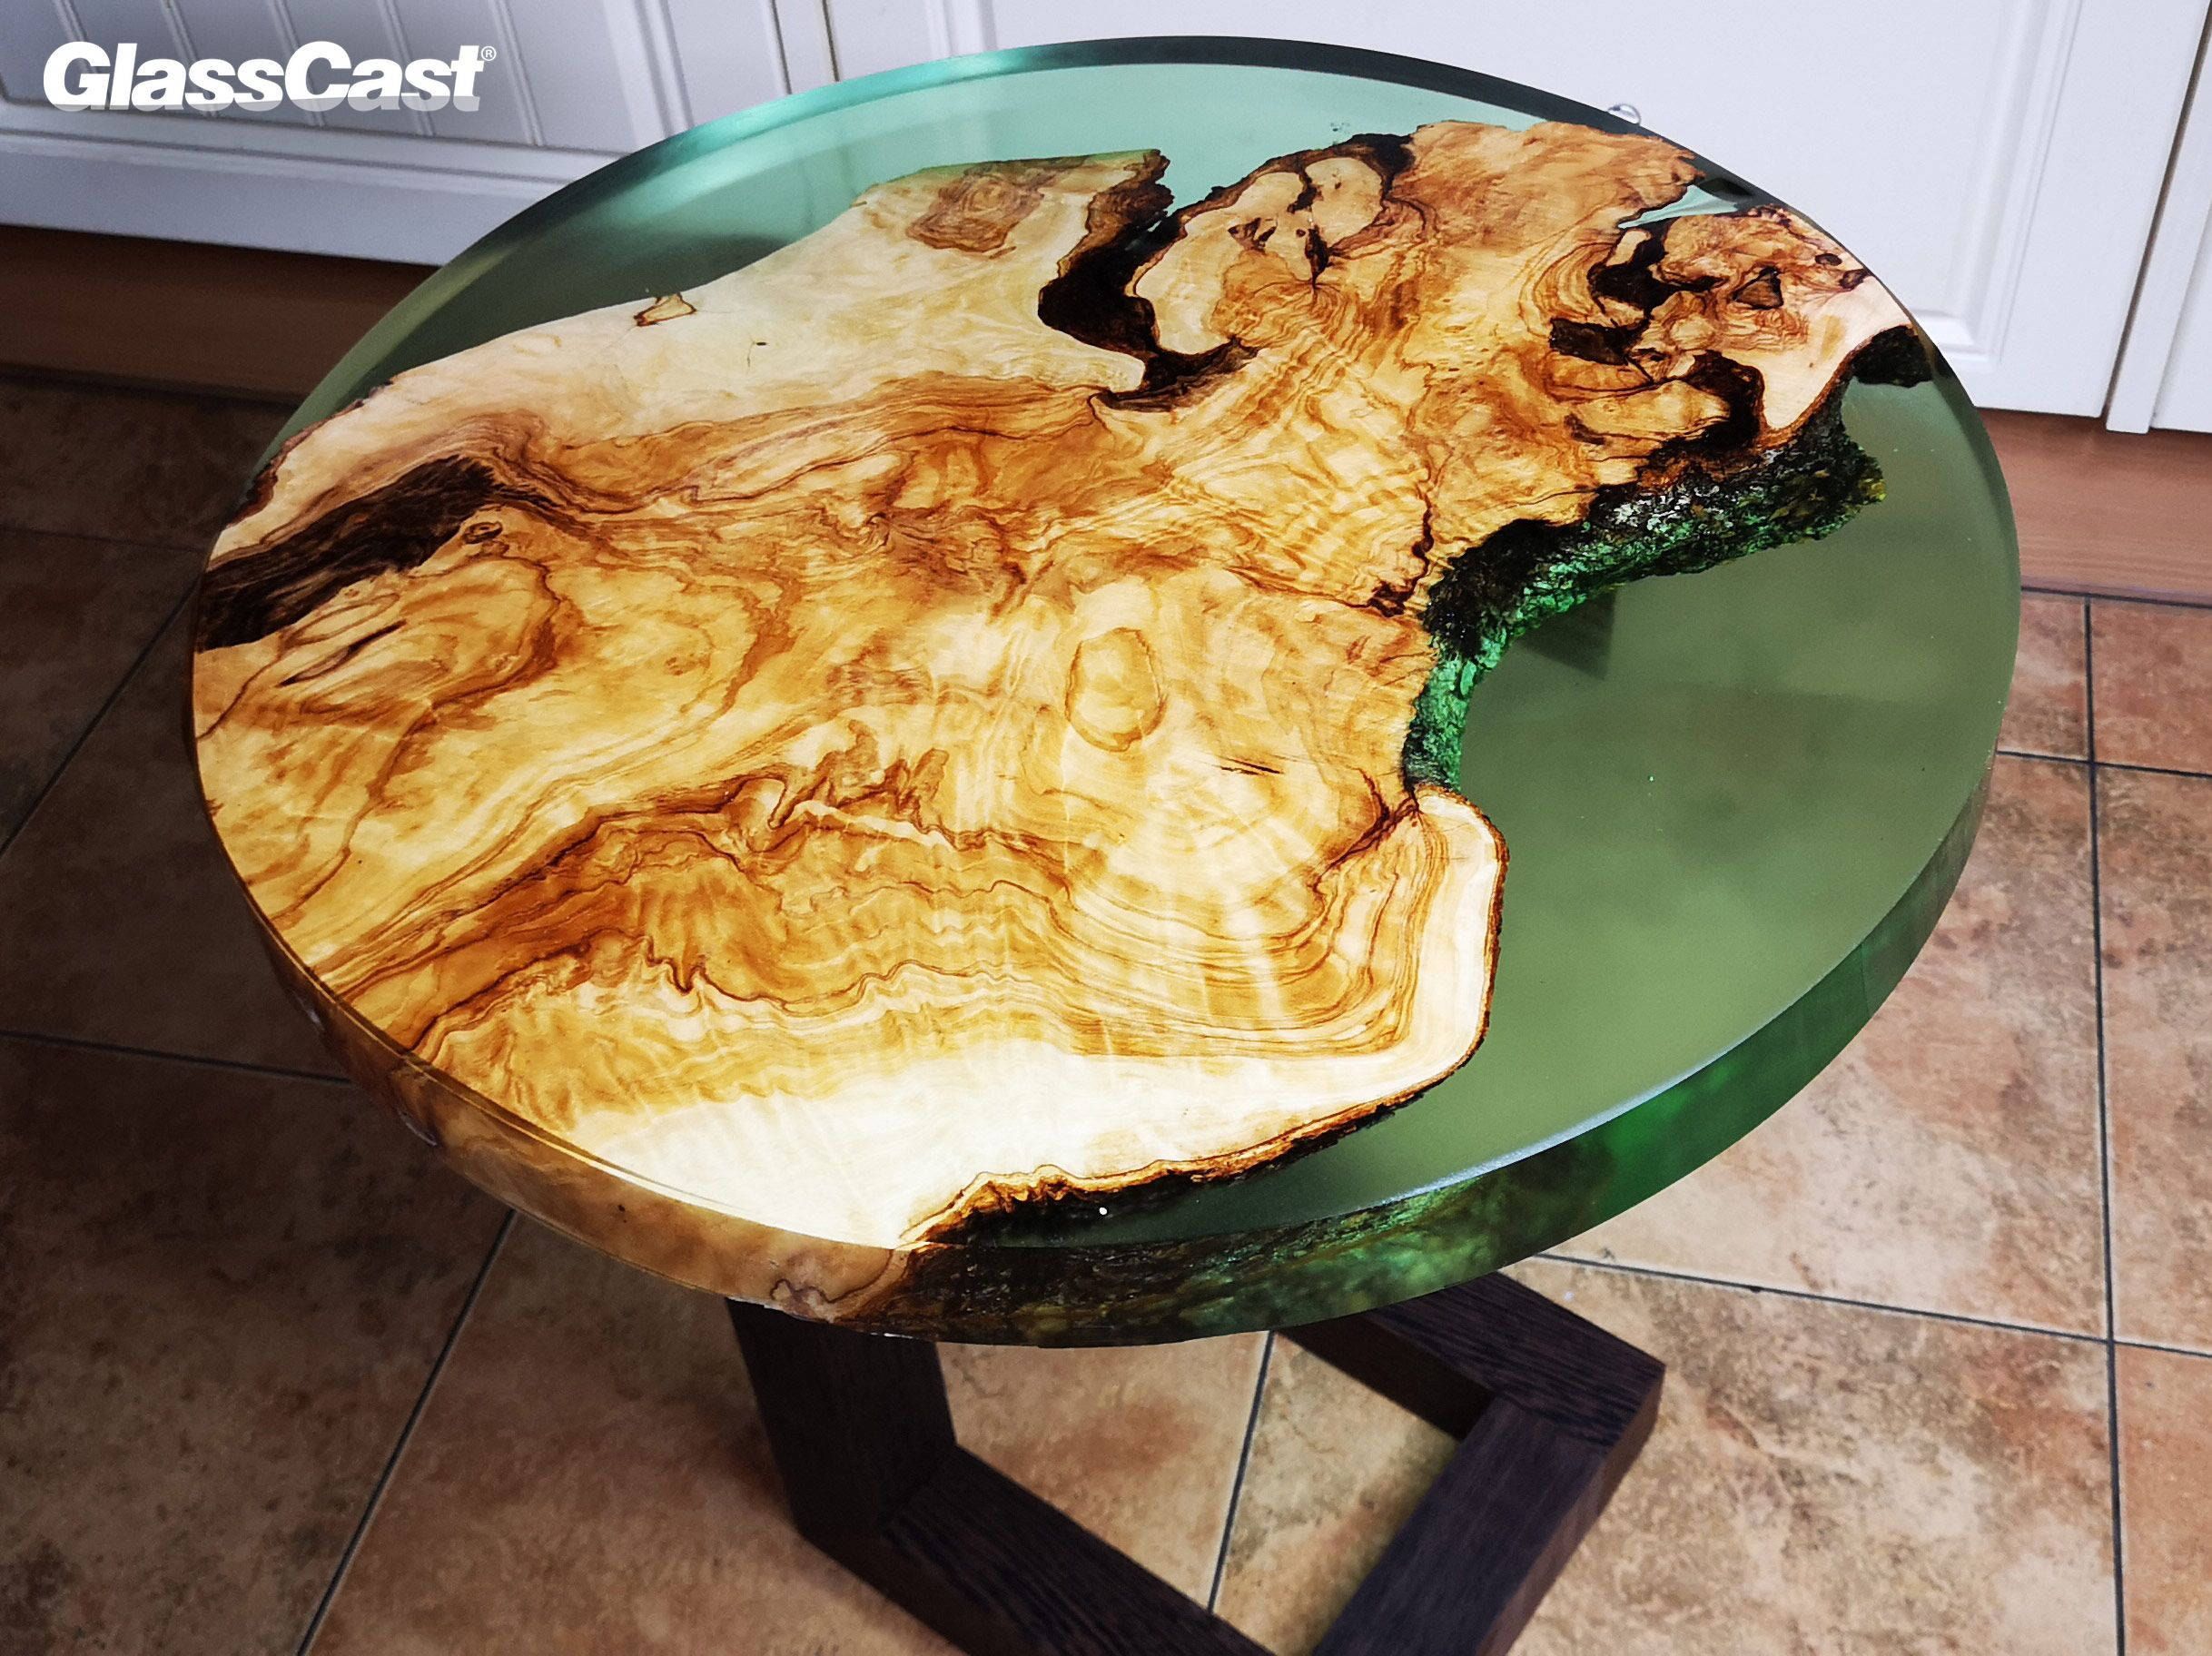 Wood and Resin Furniture - GlassCast